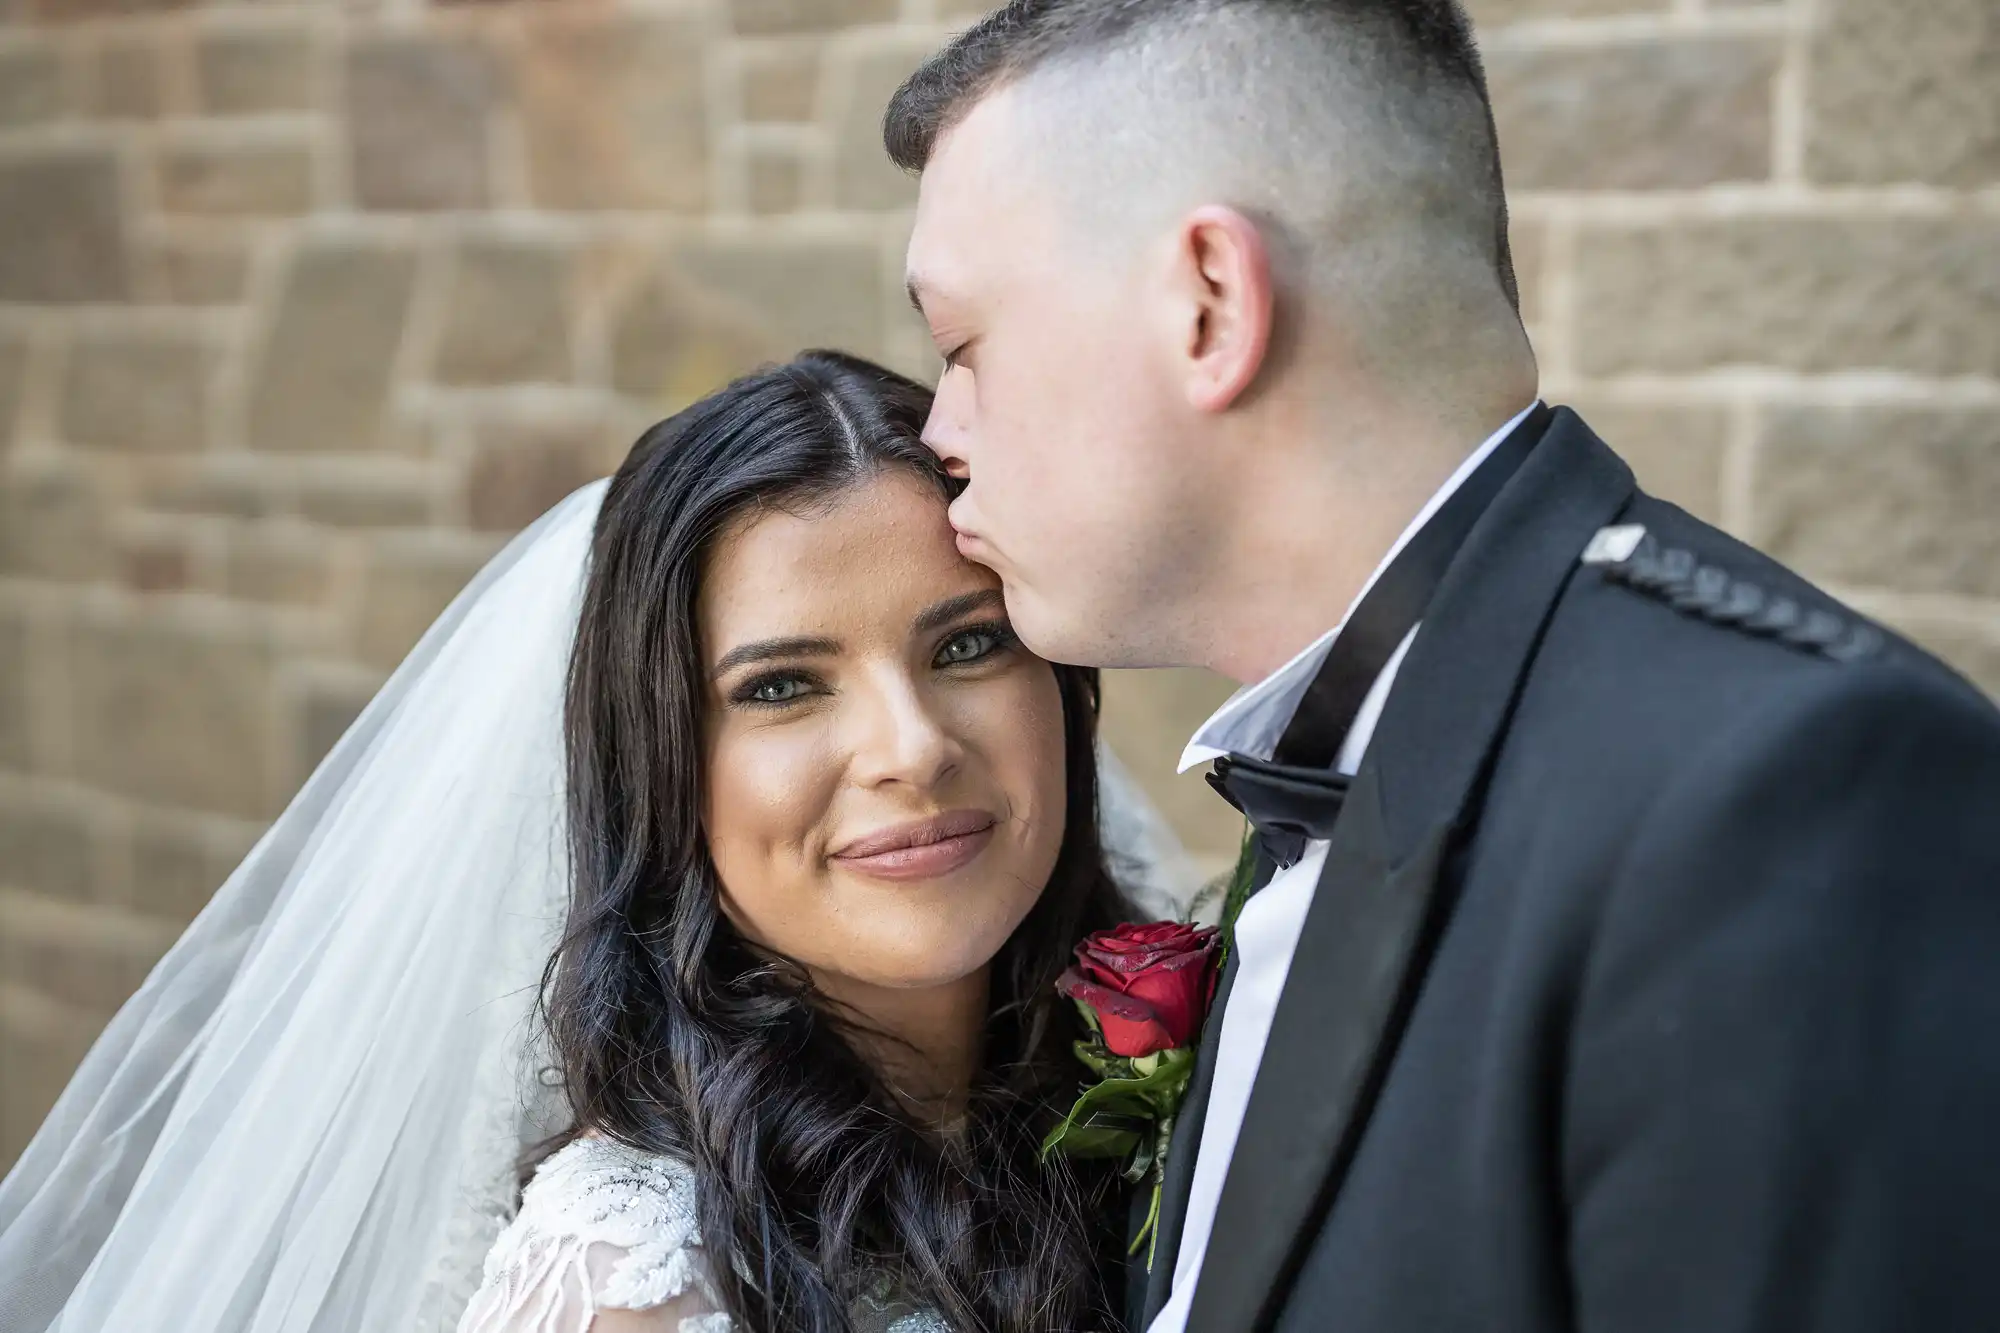 Groom in a military uniform kissing bride on the forehead outside a stone building, bride smiling at camera.